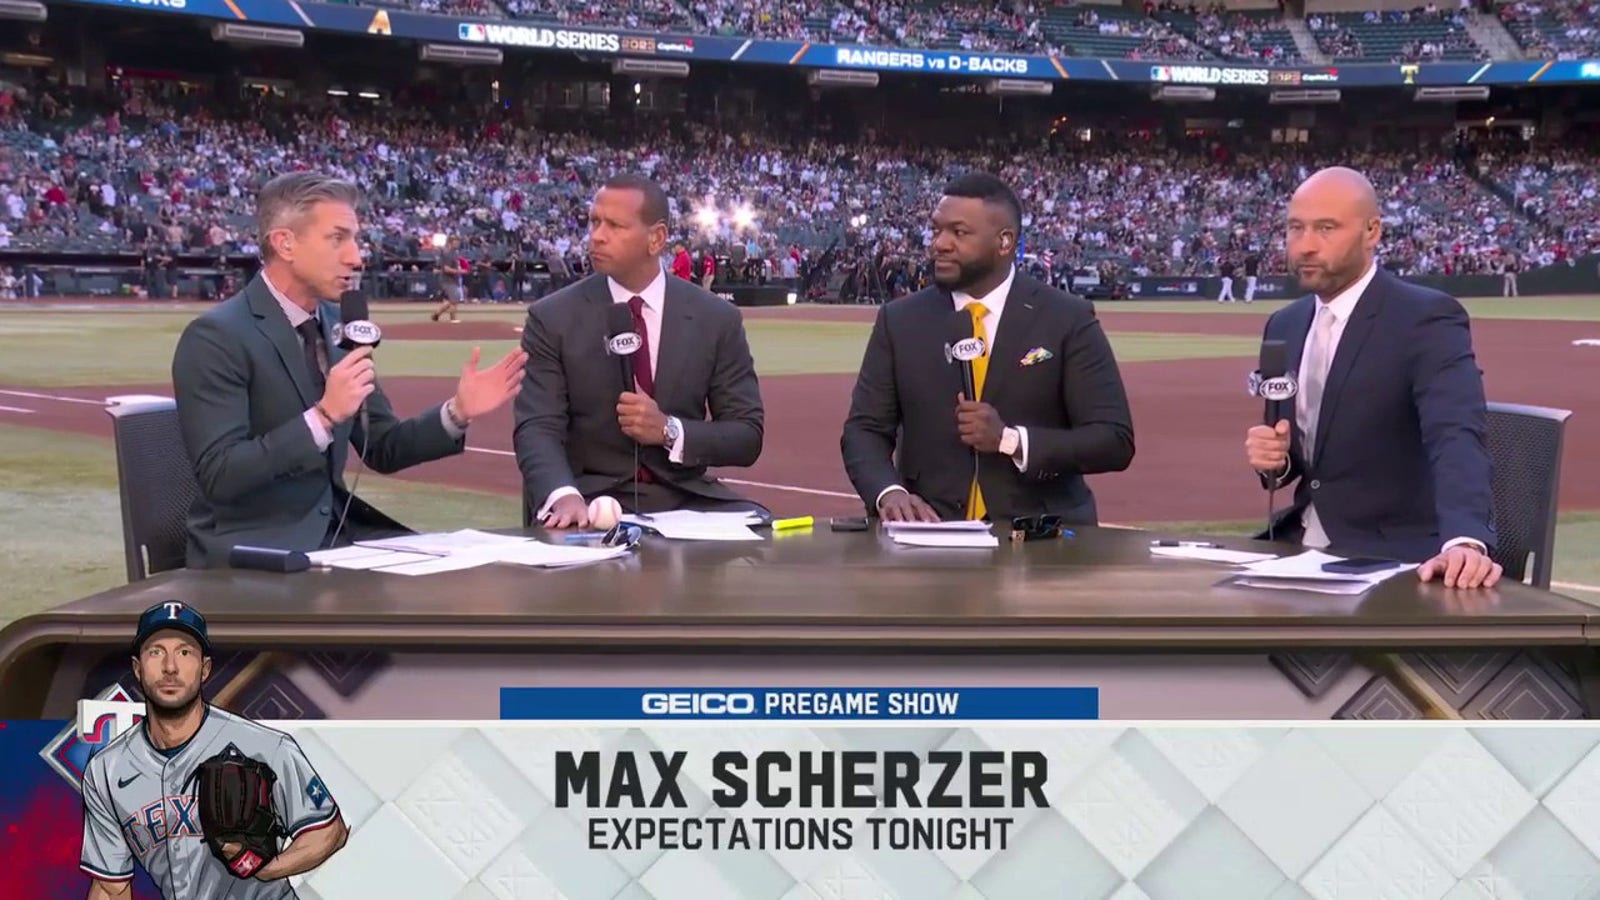 What are the expectations for Rangers' Max Scherzer? The 'MLB on FOX' crew discusses